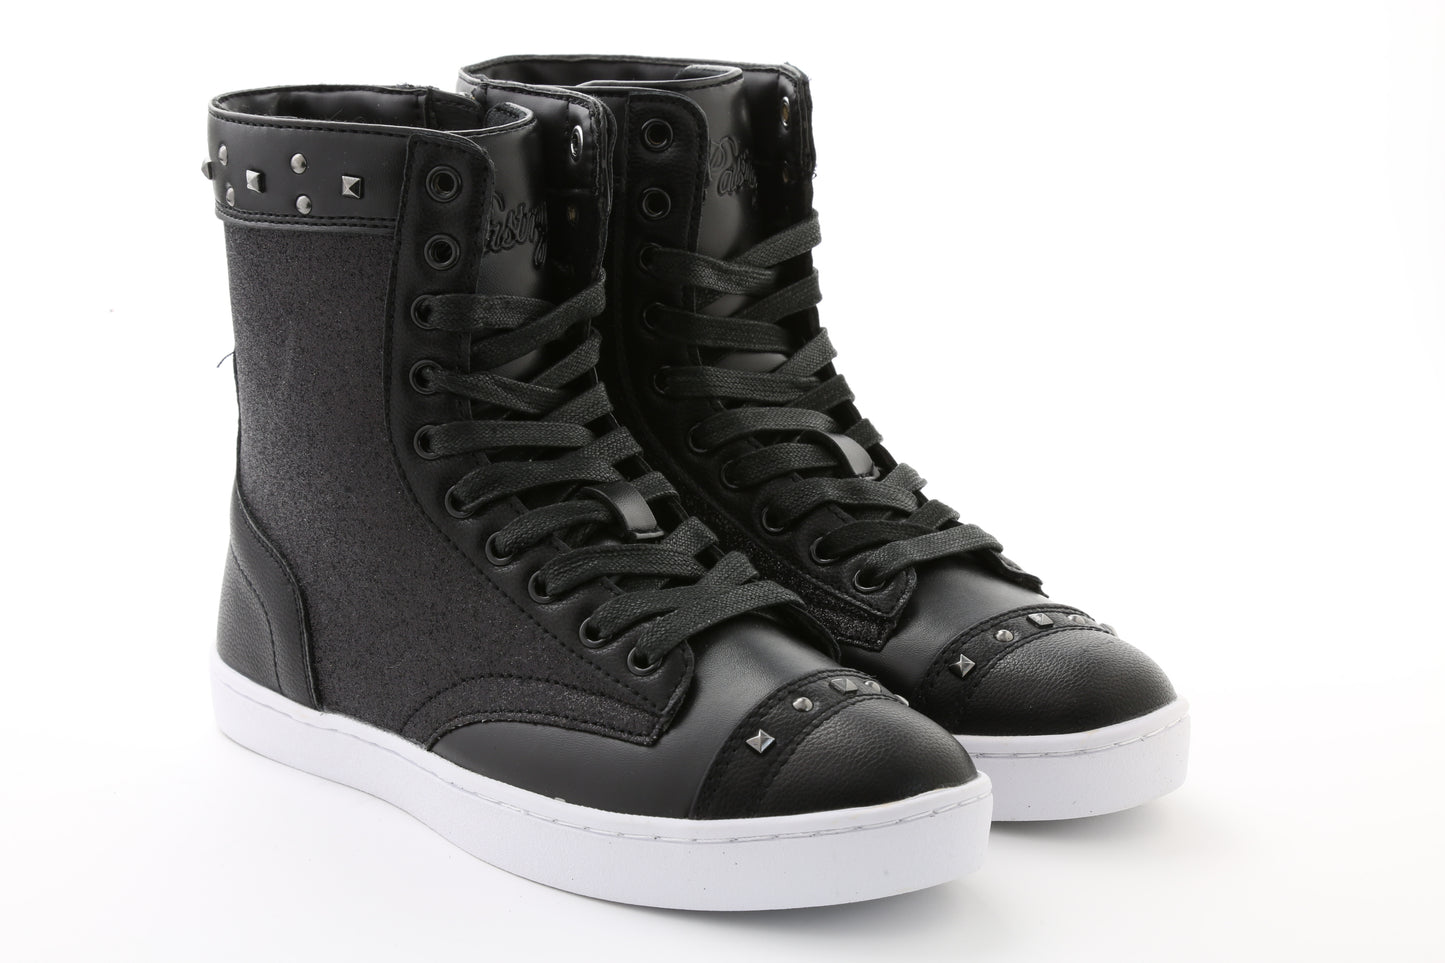 Pair of Pastry Military Glitz Adult Women's Sneaker Boot in Black/White in 3 quarter view